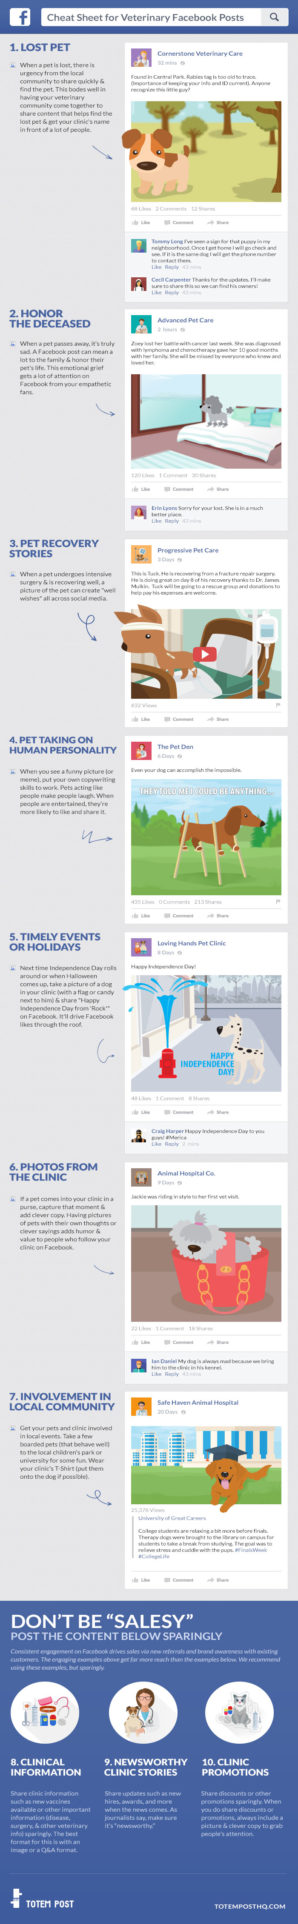 Cheat Sheet for Veterinary Facebook Posts [infographic]